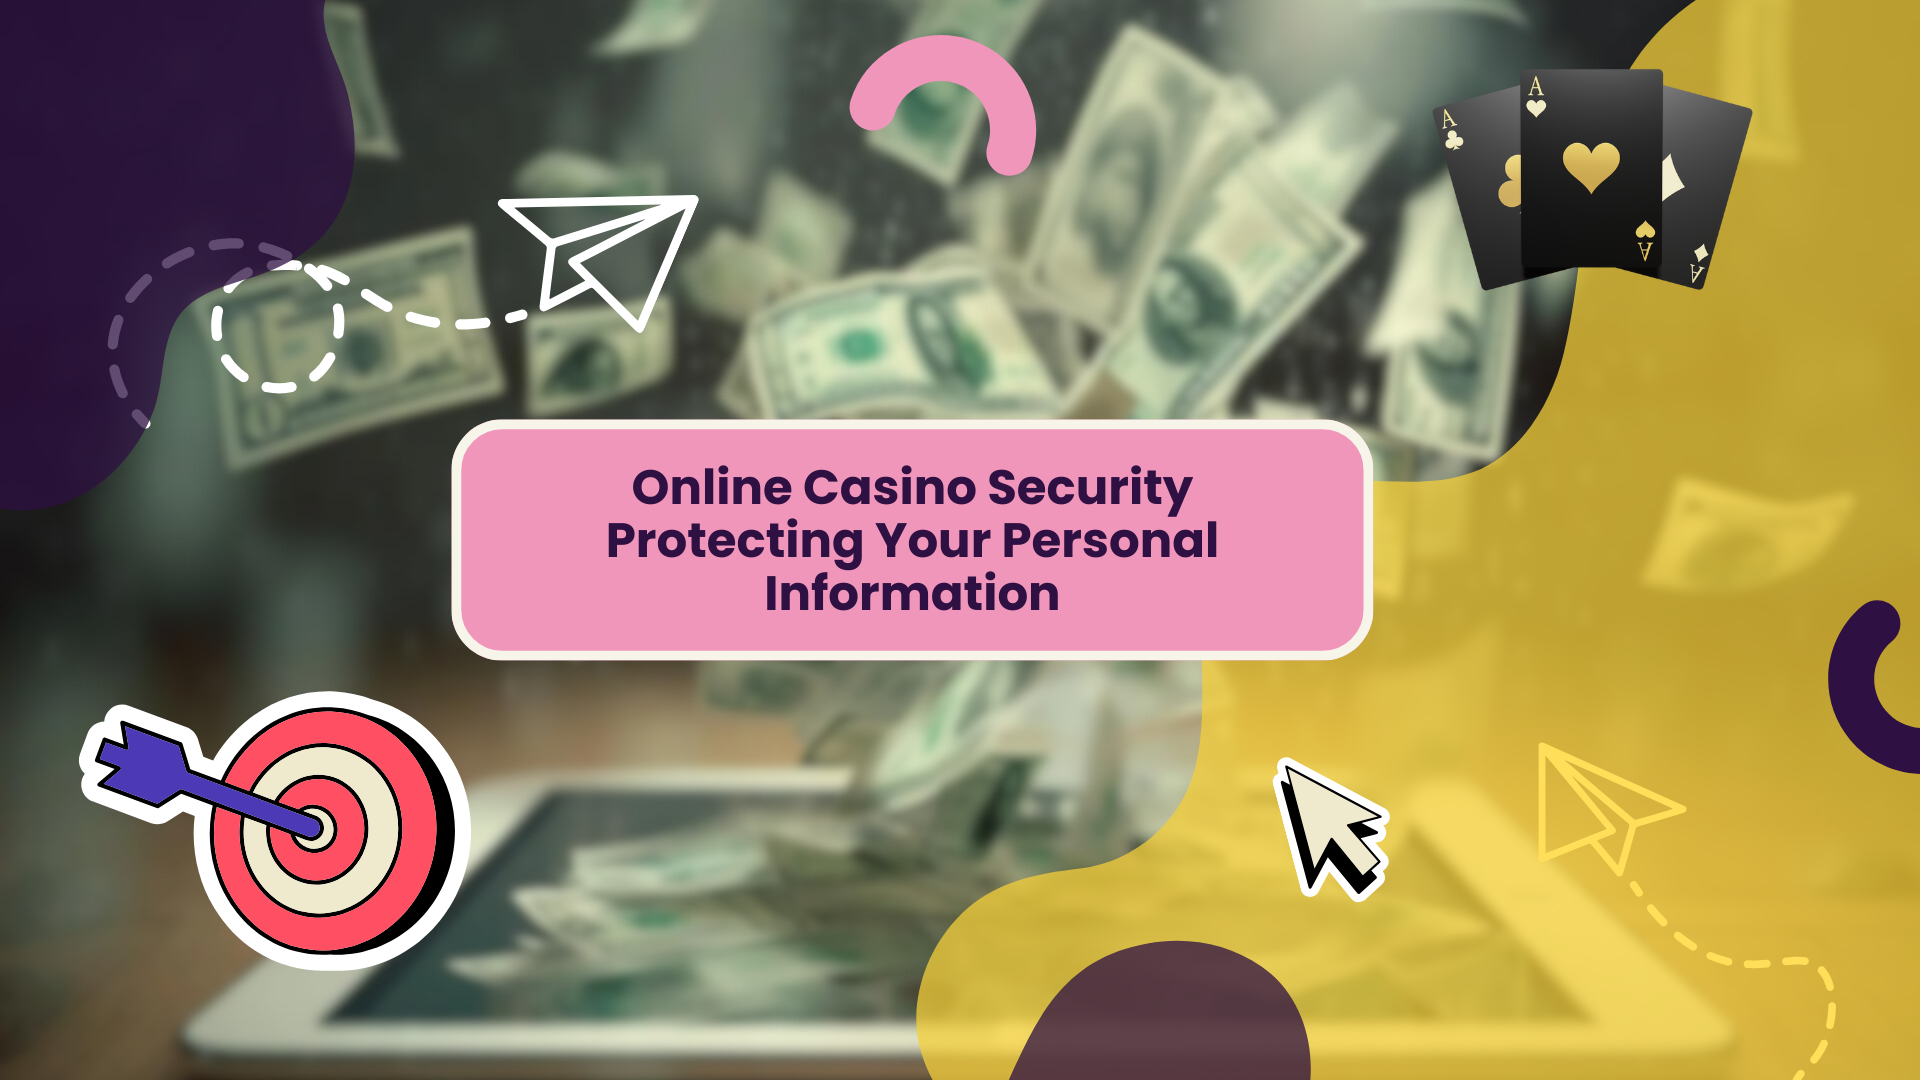 Online Casino Security Protecting Your Personal Information